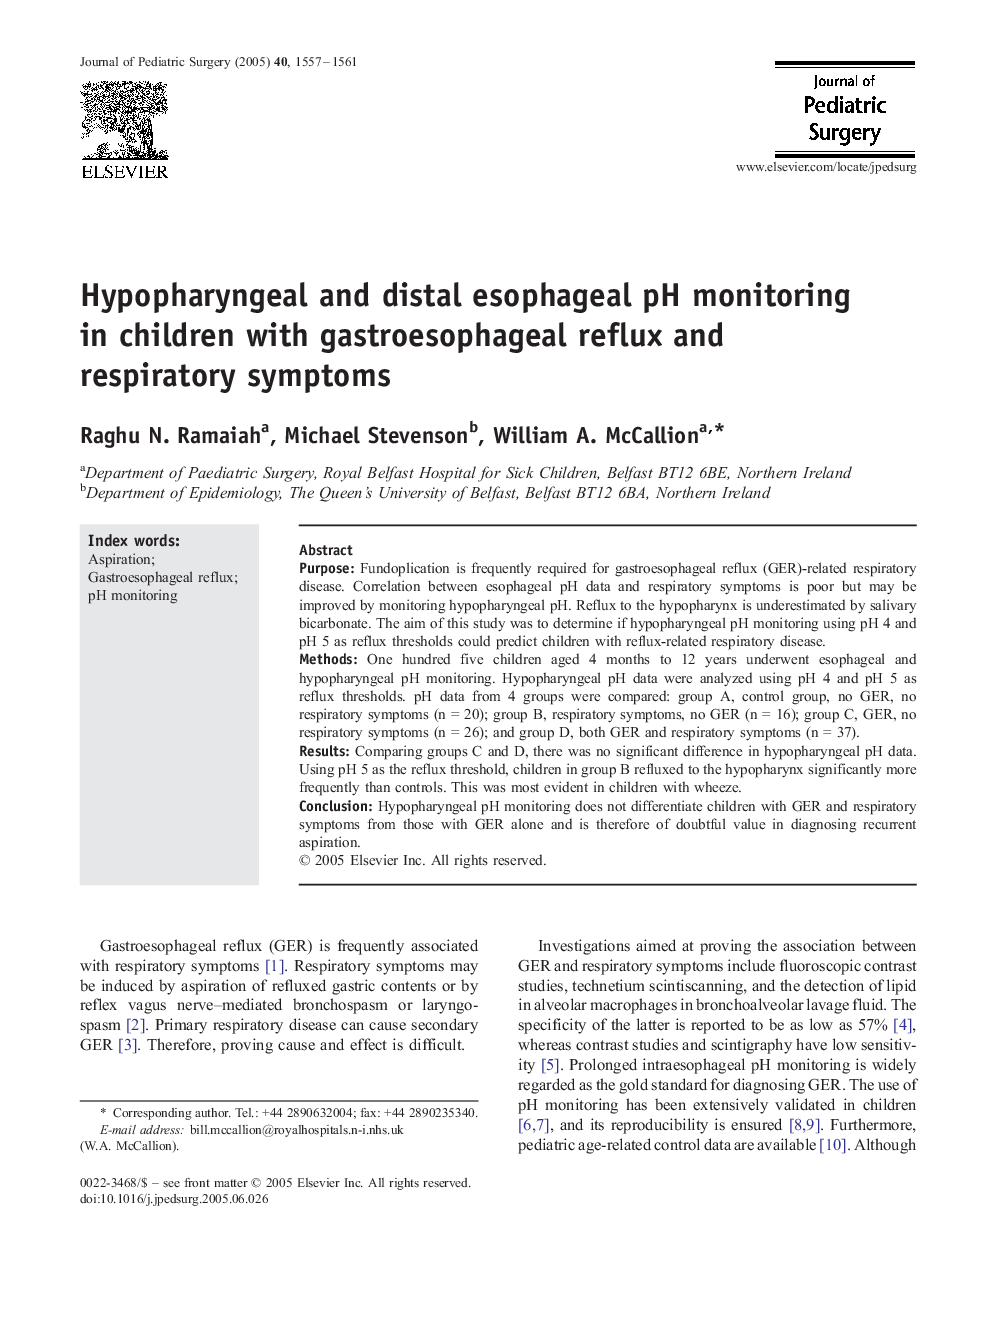 Hypopharyngeal and distal esophageal pH monitoring in children with gastroesophageal reflux and respiratory symptoms